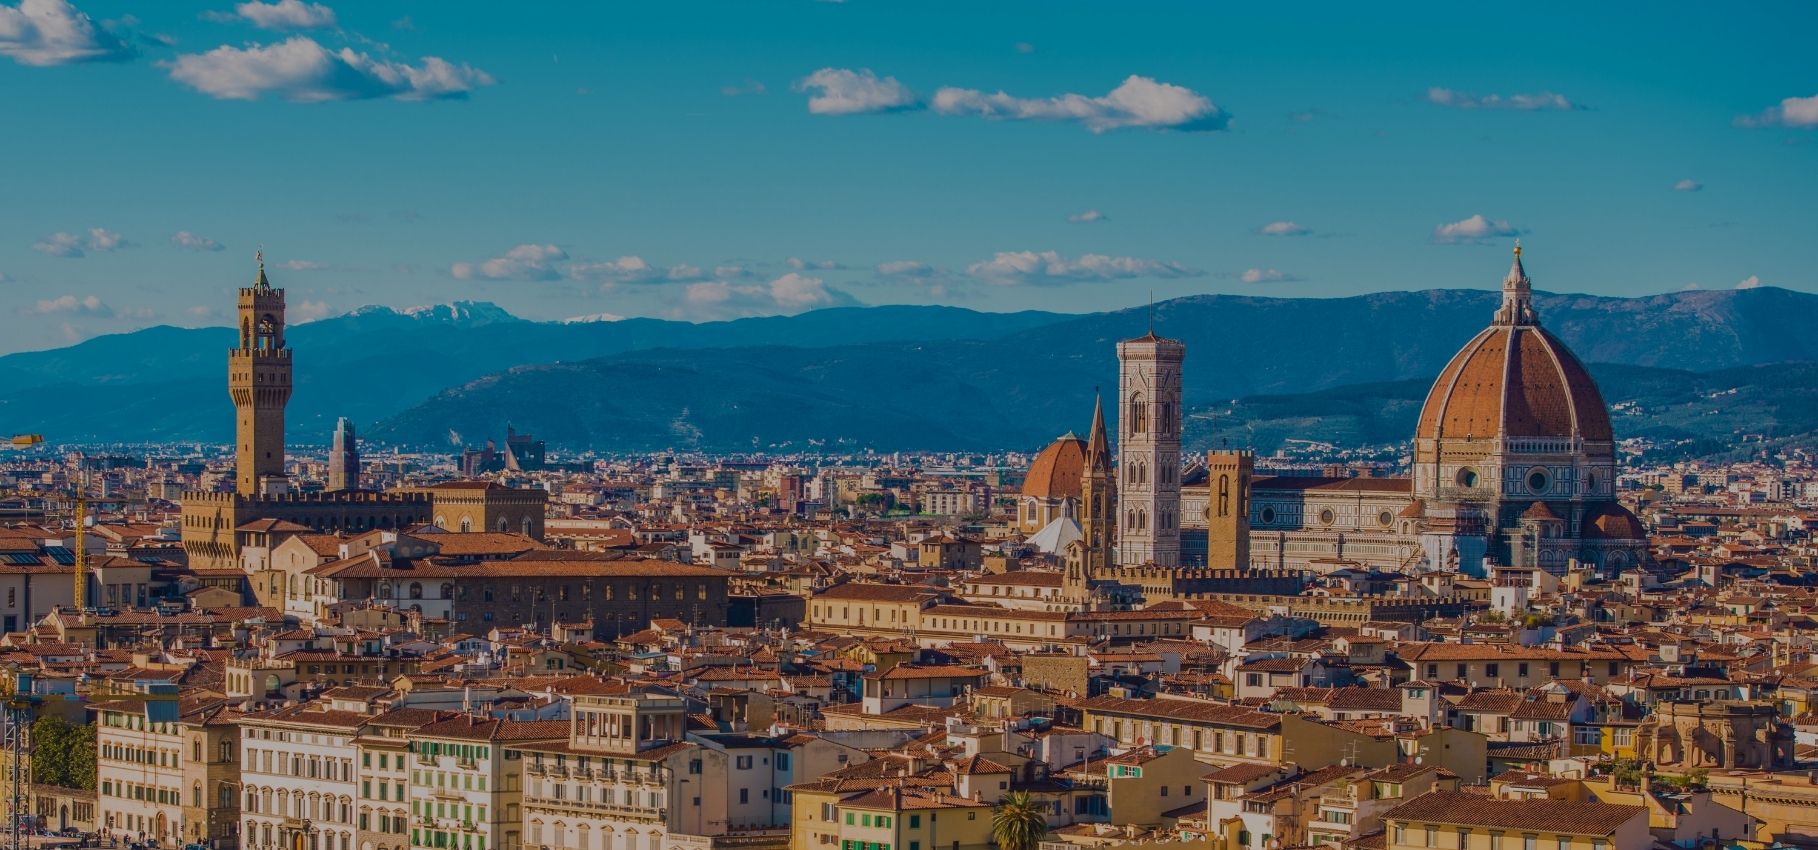 The Best things to do in Florence, Italy